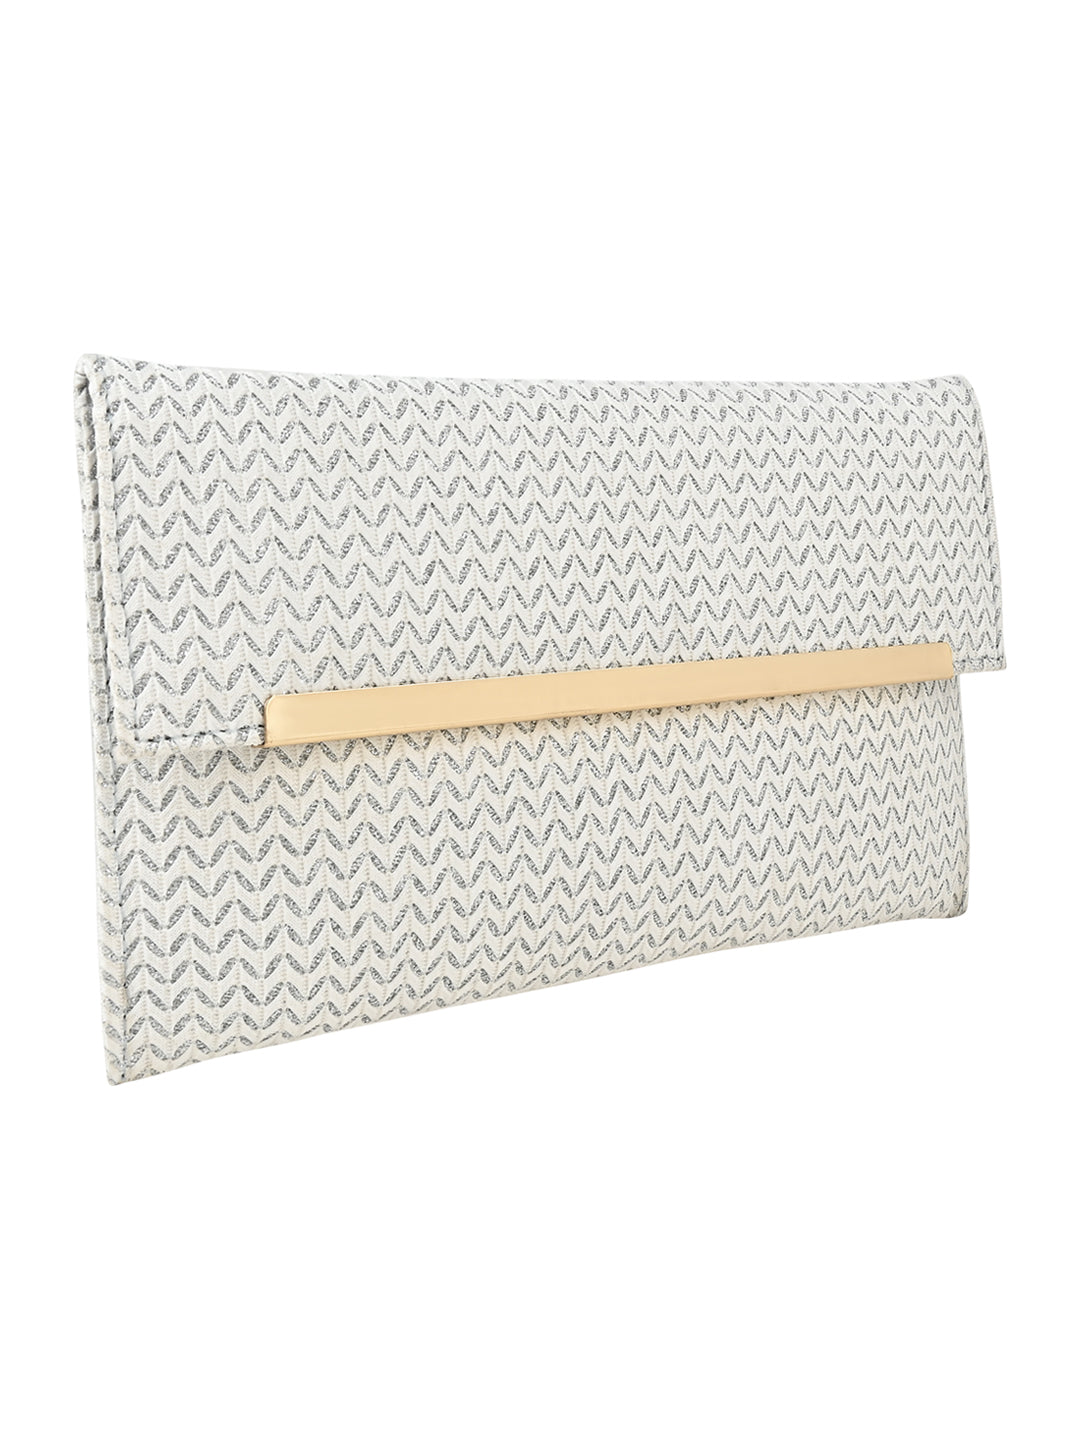 A clutch perfect for a formal event. 